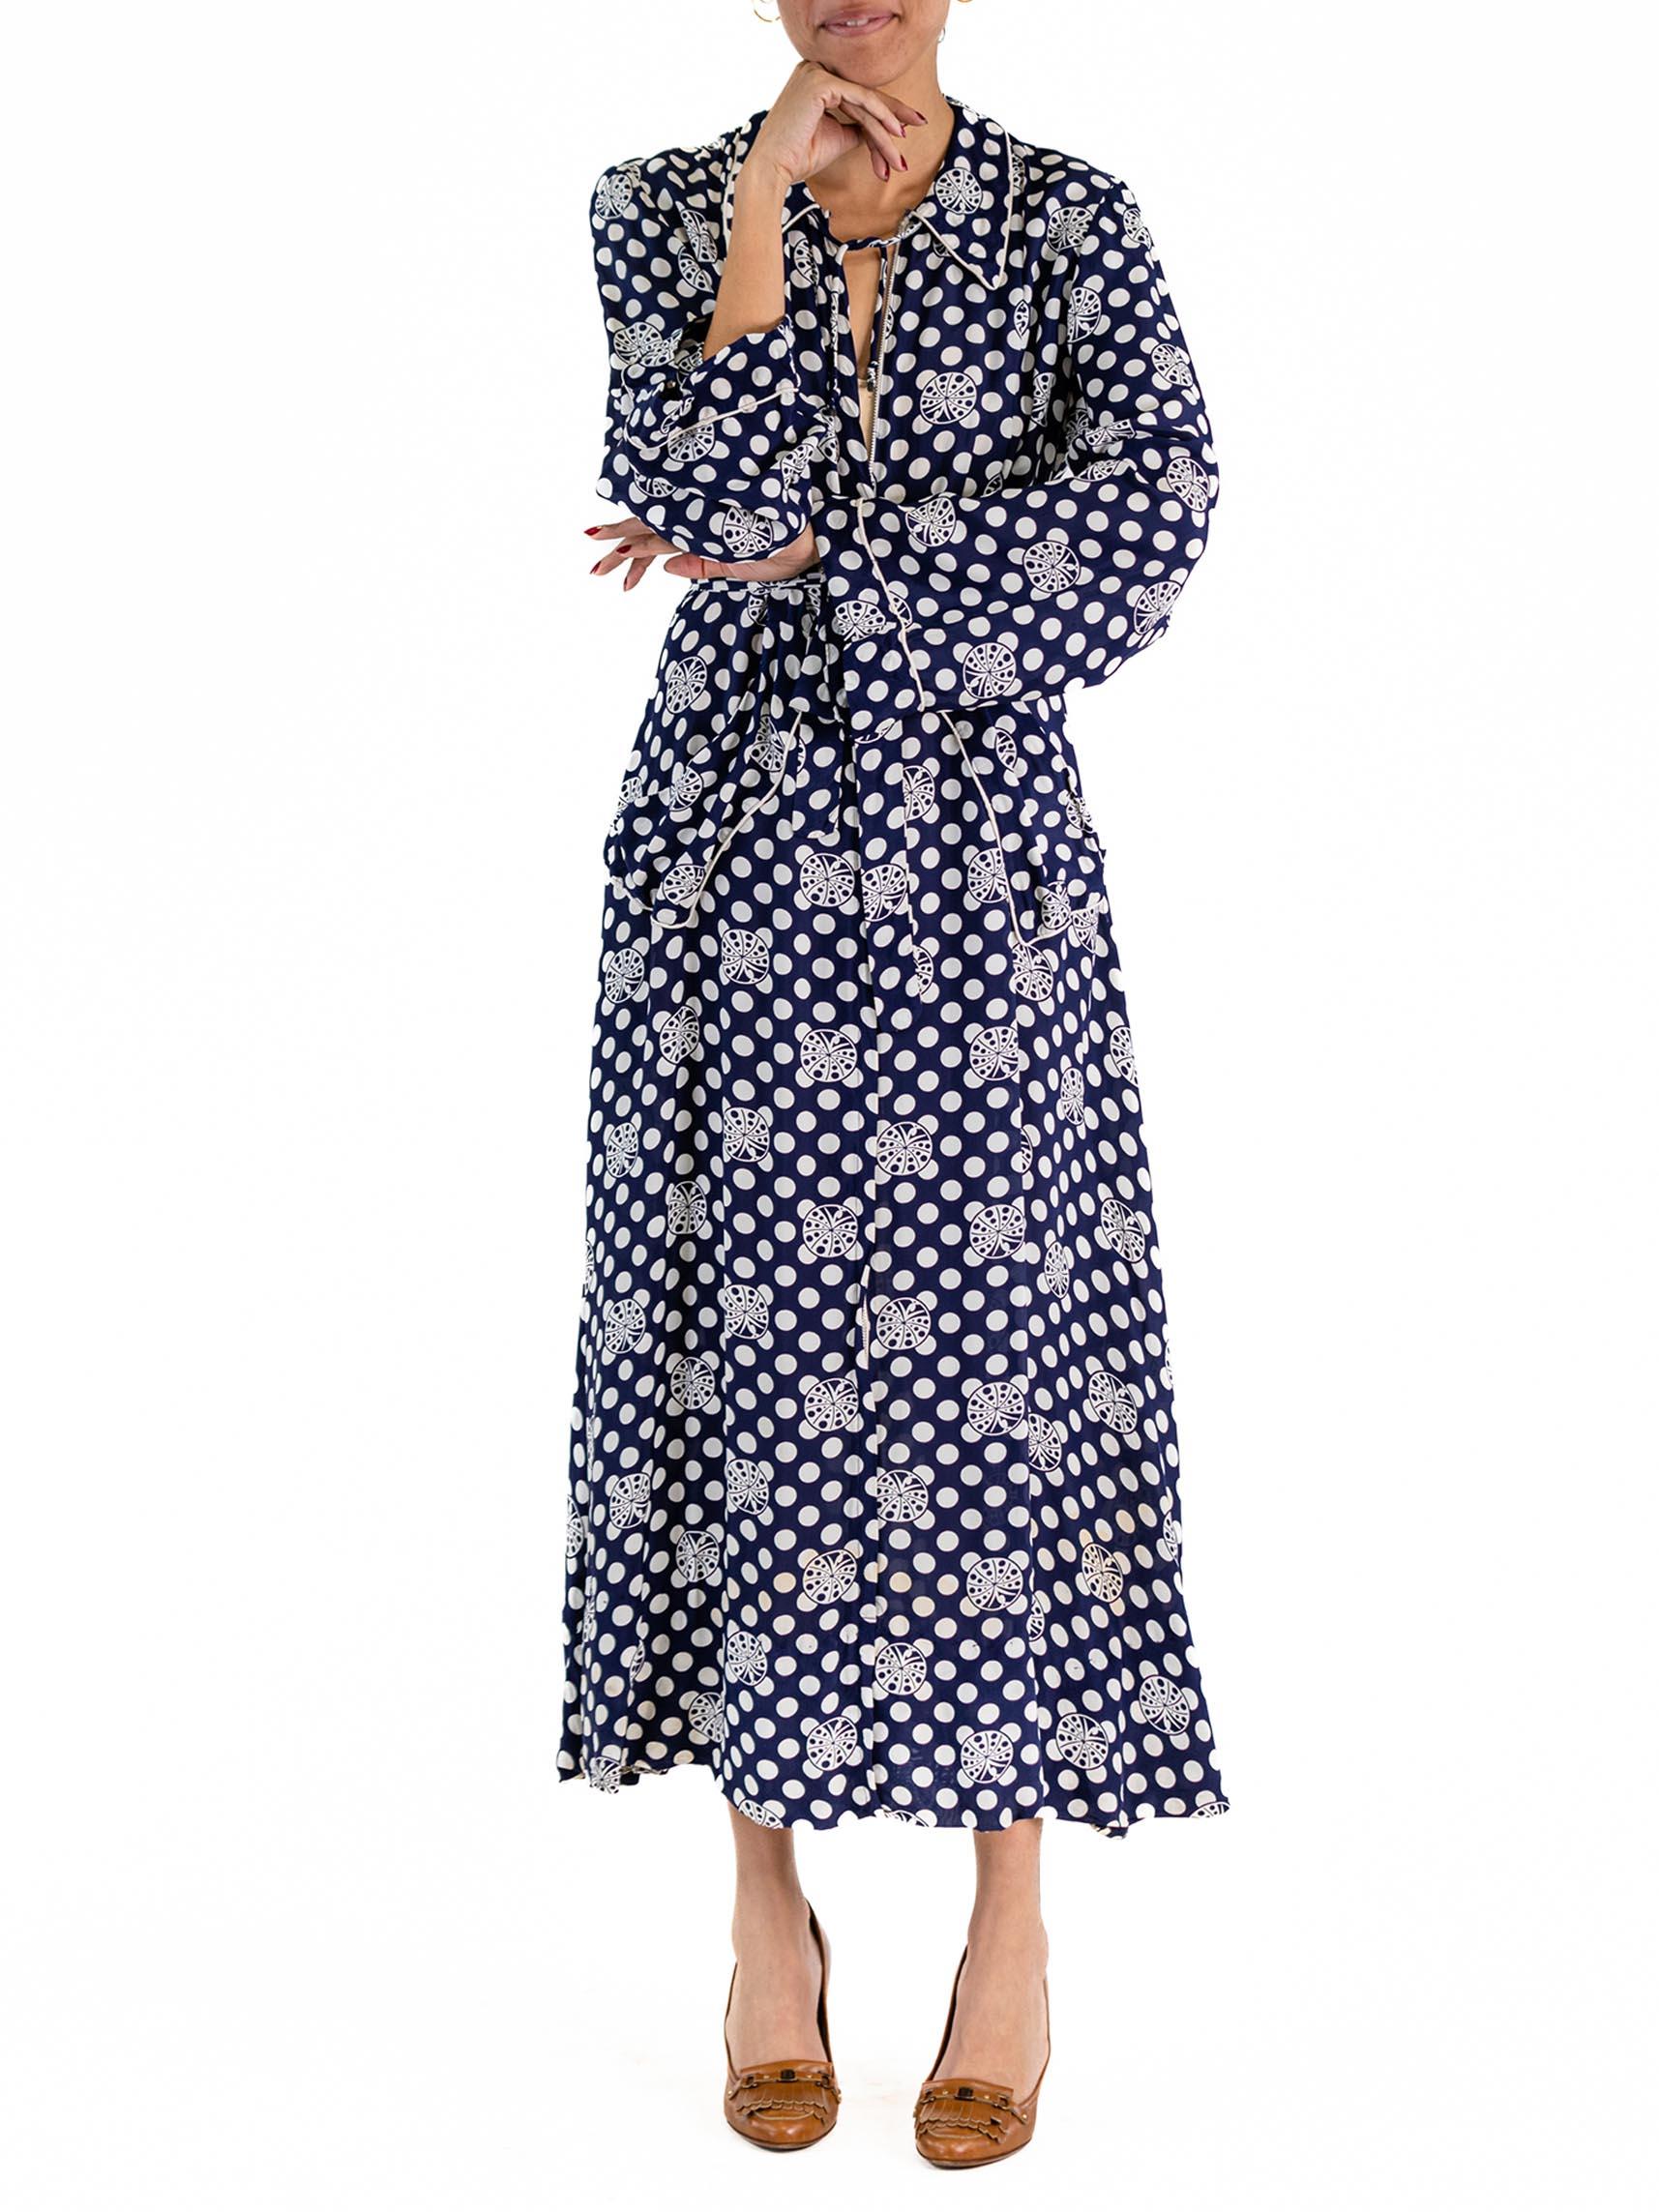 1940S Blue & White Cold Rayon Polka Dot Dress With Zipper Front Pockets For Sale 3